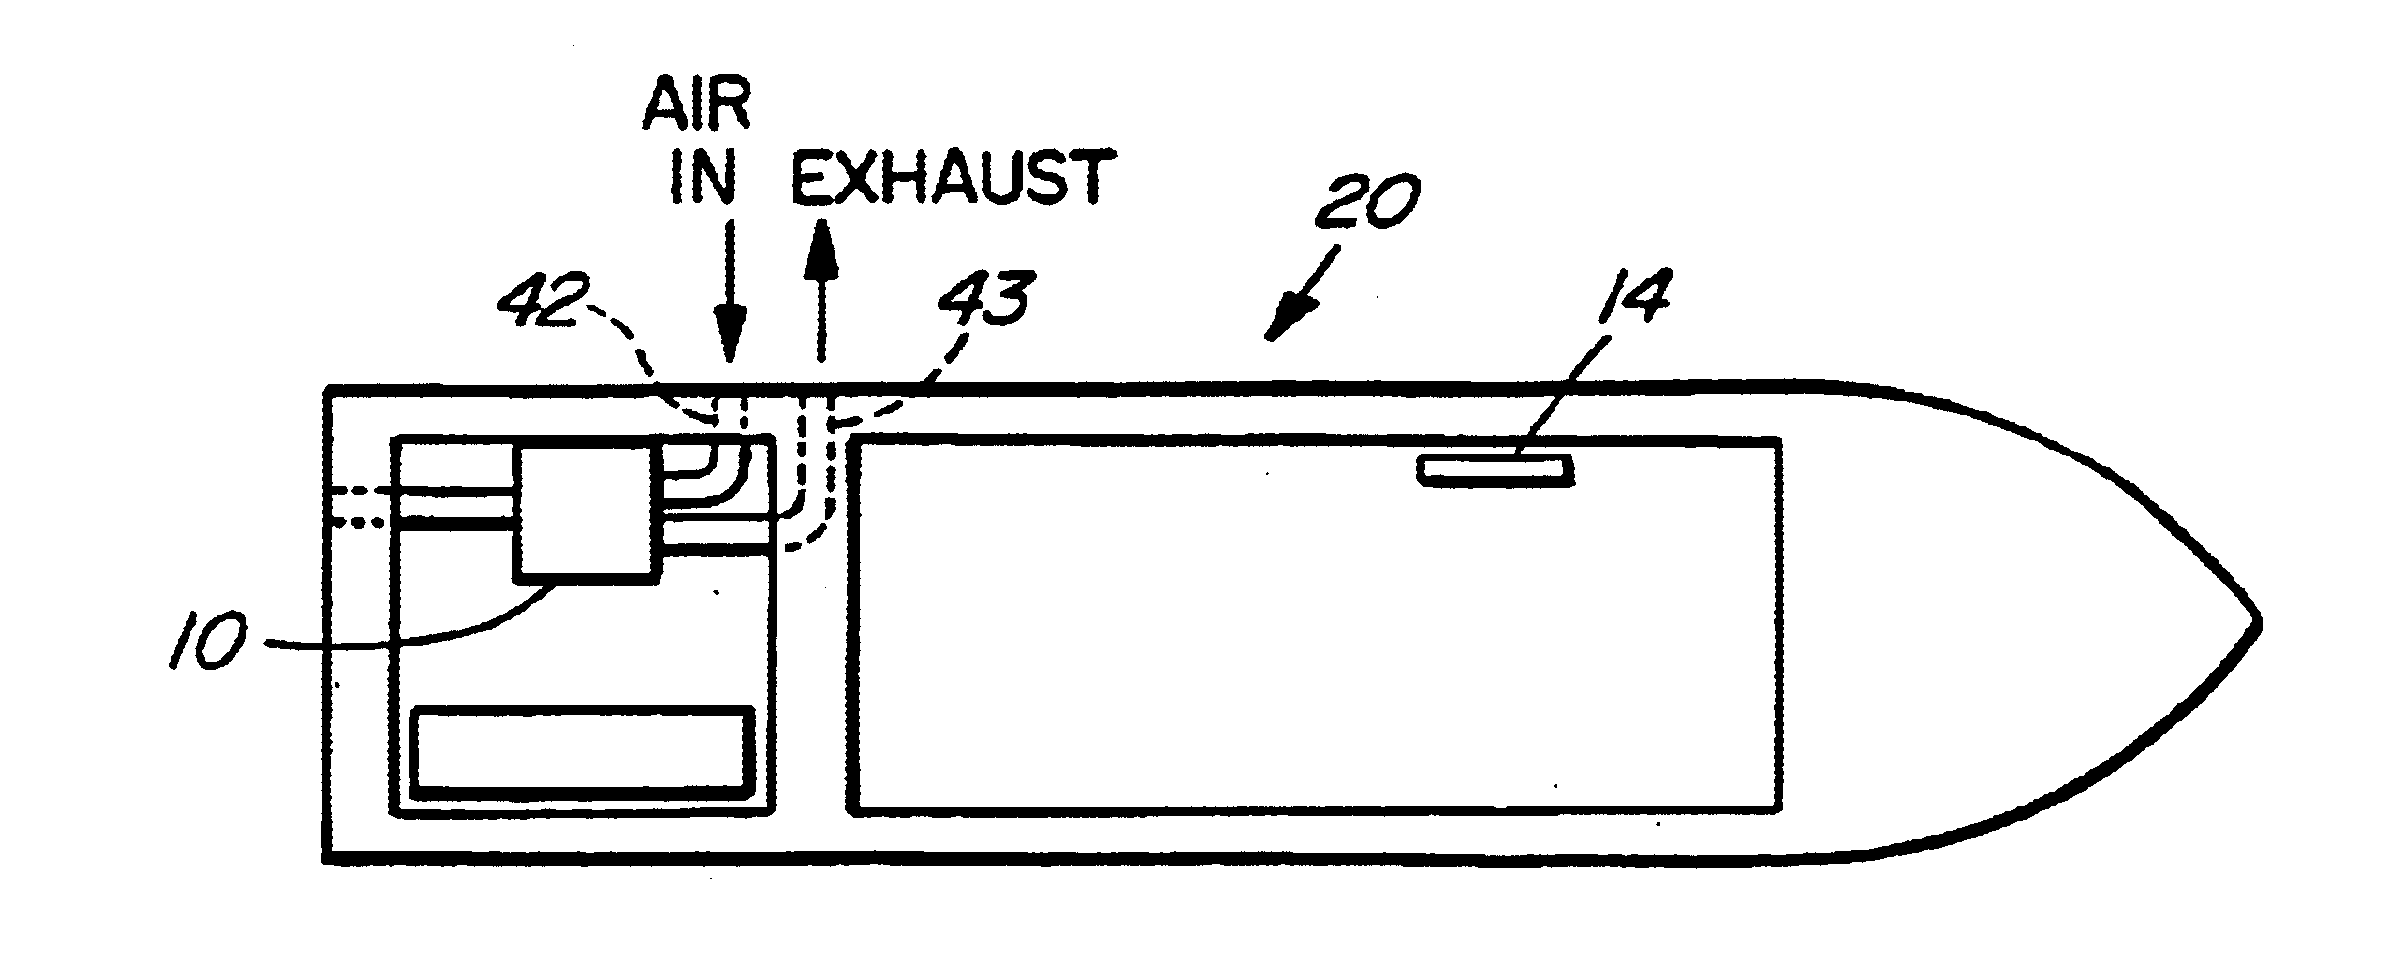 Narrowboat auxiliary heater and method of controlling same